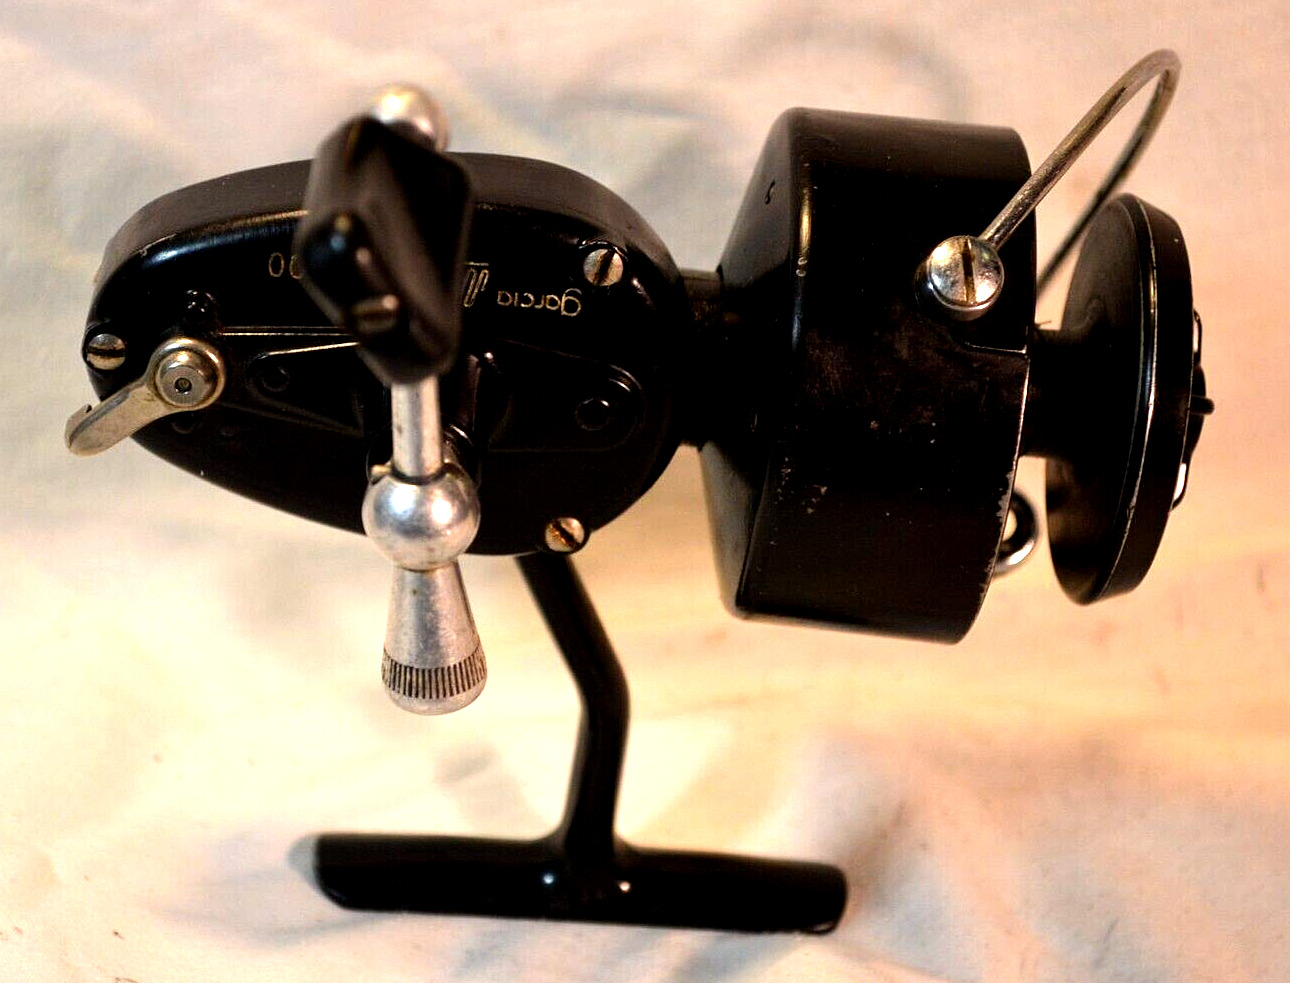 Vintage Garcia Mitchell 300 Spinning Reel Made In France, Serial #8626730.